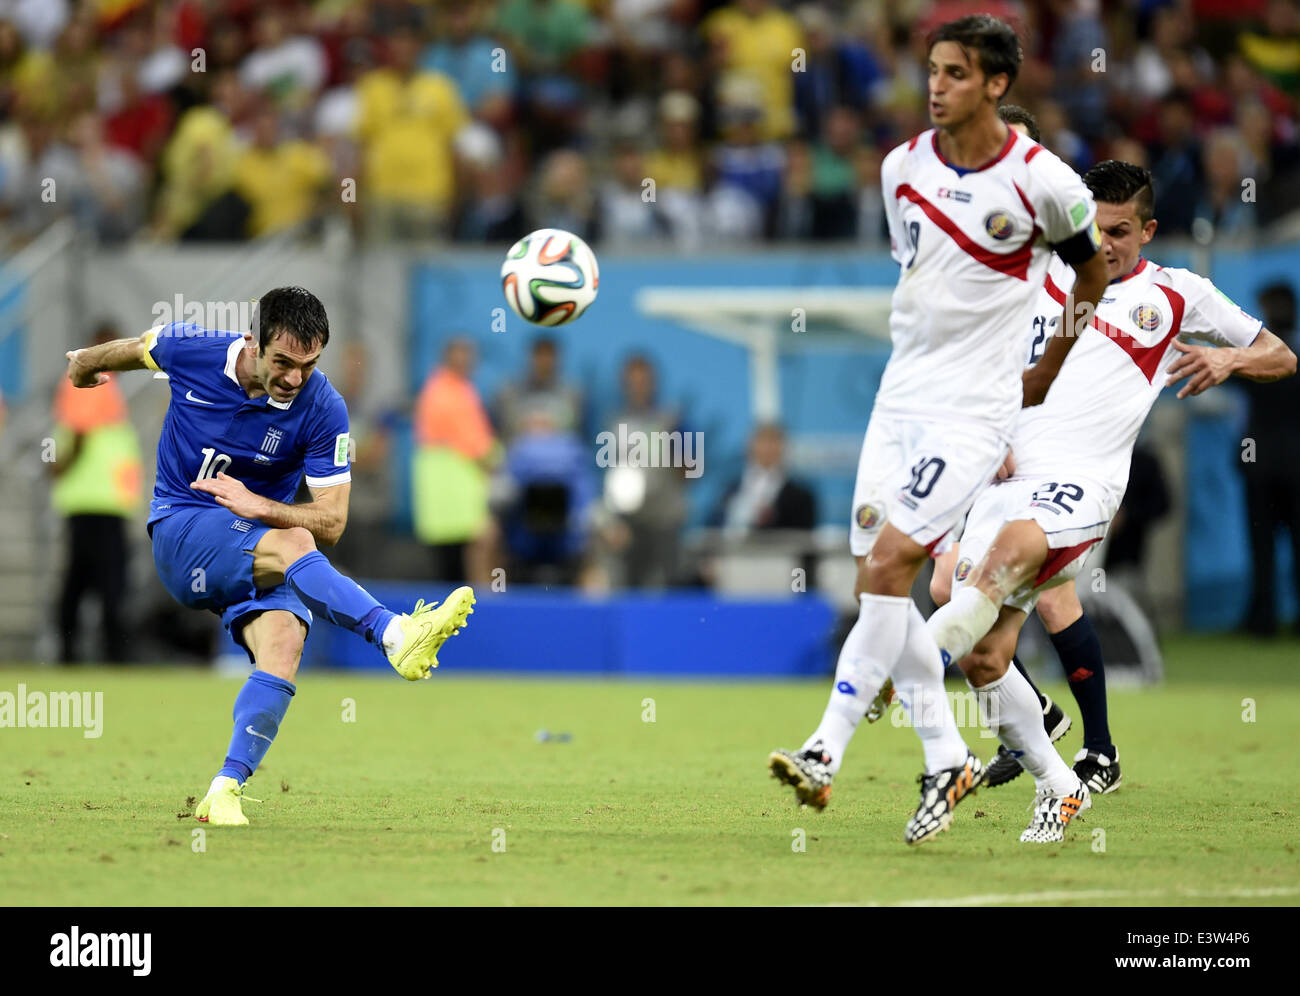 (140629) -- RECIFE, June 29, 2014 (Xinhua) -- Greece's Giorgos Karagounis (L) shoots during a Round of 16 match between Costa Rica and Greece of 2014 FIFA World Cup at the Arena Pernambuco Stadium in Recife, Brazil, on June 29, 2014.(Xinhua/Yang Lei)(xzj) Stock Photo